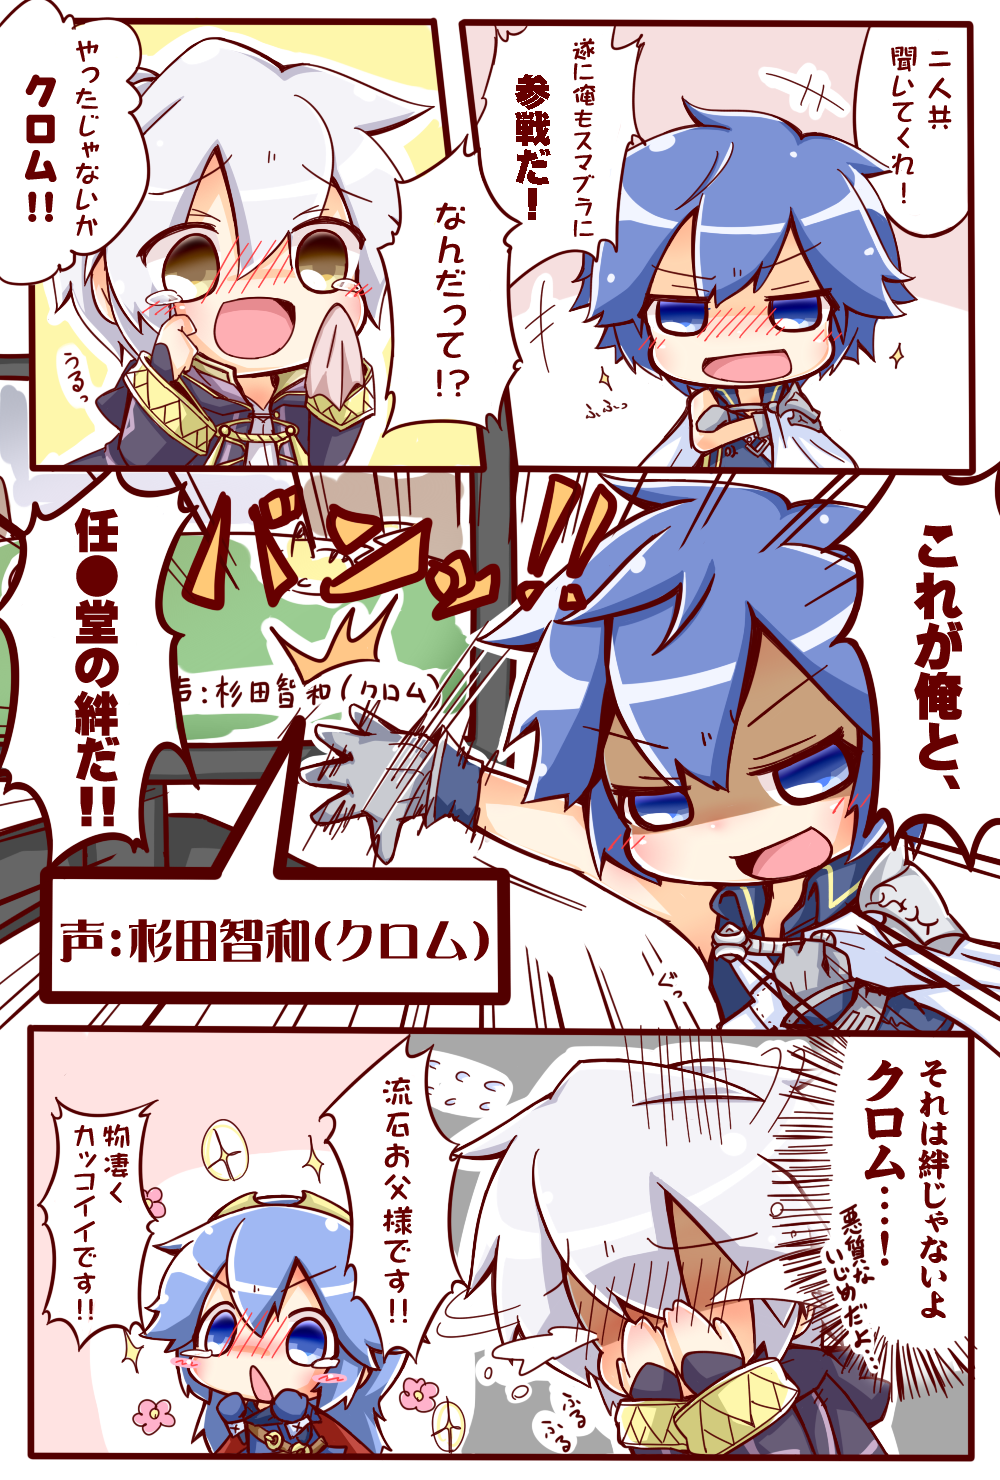 2girls blue_eyes blue_hair blush chibi cloak comic covering_face father_and_daughter fire_emblem fire_emblem:_kakusei flower gen_1_pokemon gloves hairband hands_on_own_face highres hood hooded_cloak krom long_coat lucina male_my_unit_(fire_emblem:_kakusei) multiple_girls my_unit_(fire_emblem:_kakusei) pauldrons pikachu pokemon pokemon_(creature) ritateo shaded_face short_hair shoulder_pads sparkle speech_bubble super_smash_bros. tears tiara translation_request white_hair